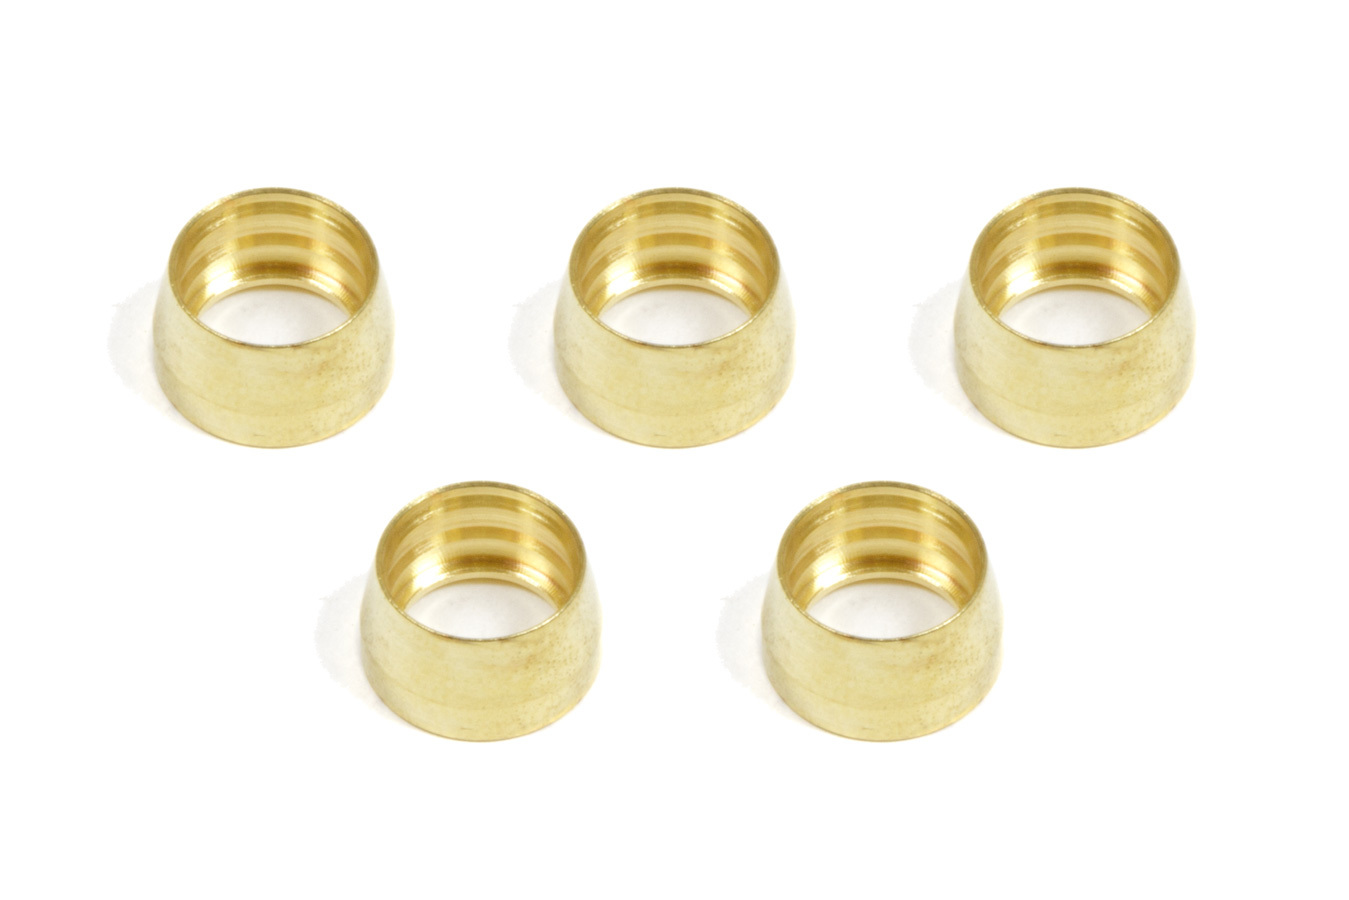 Aeroquip FCM3823 Compression Ferrule, 6 AN, Brass, PTFE Fittings, Set of 5